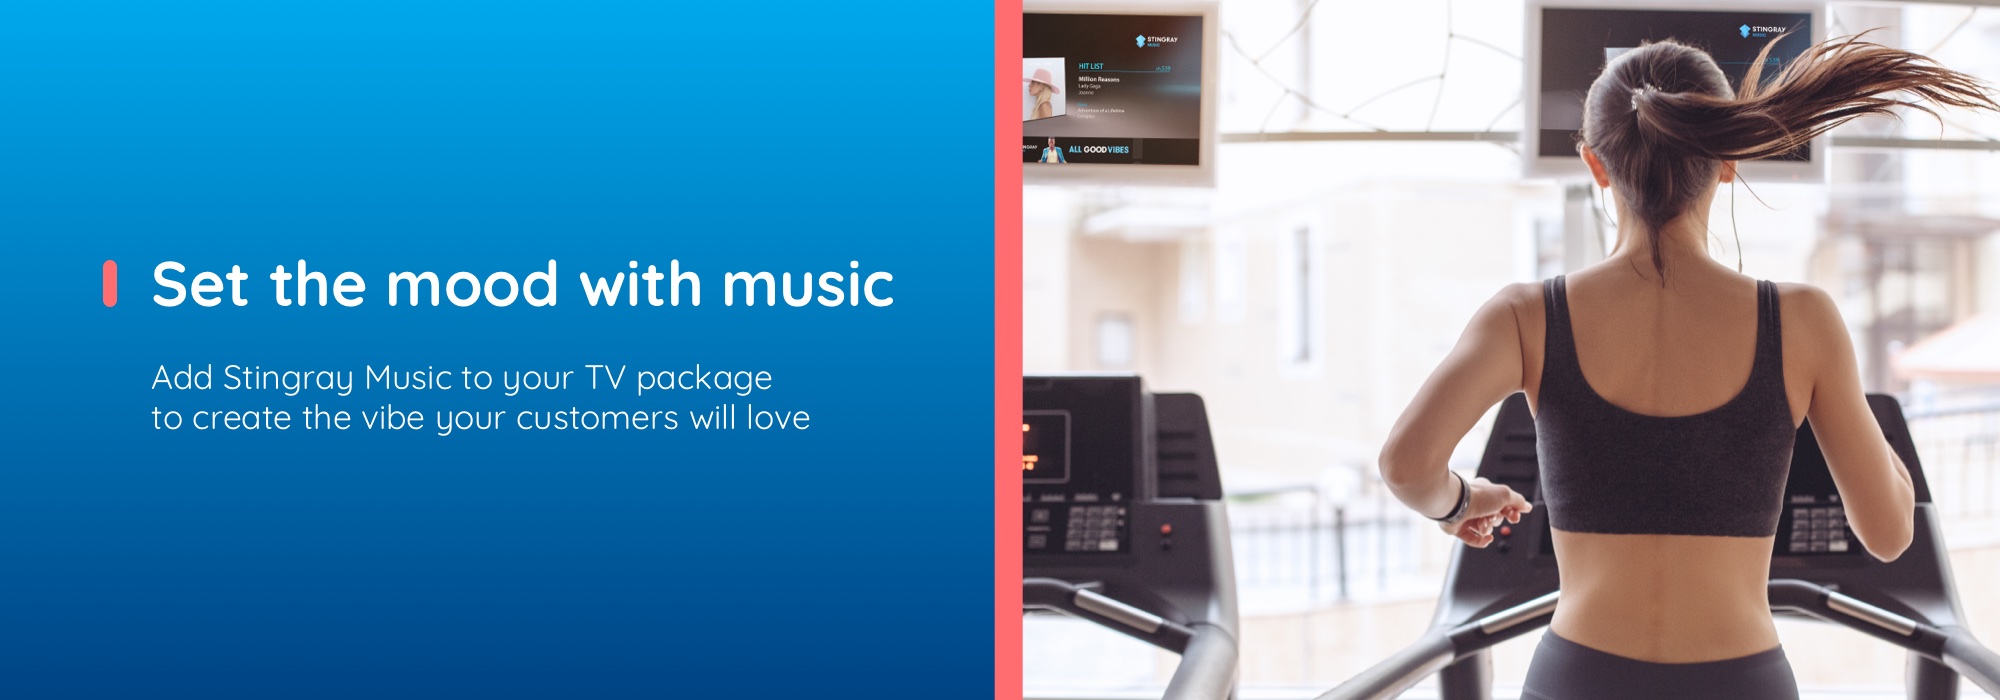 Set the mood with music. Add Stingray Music to your TV package to create the vide your customers will love.